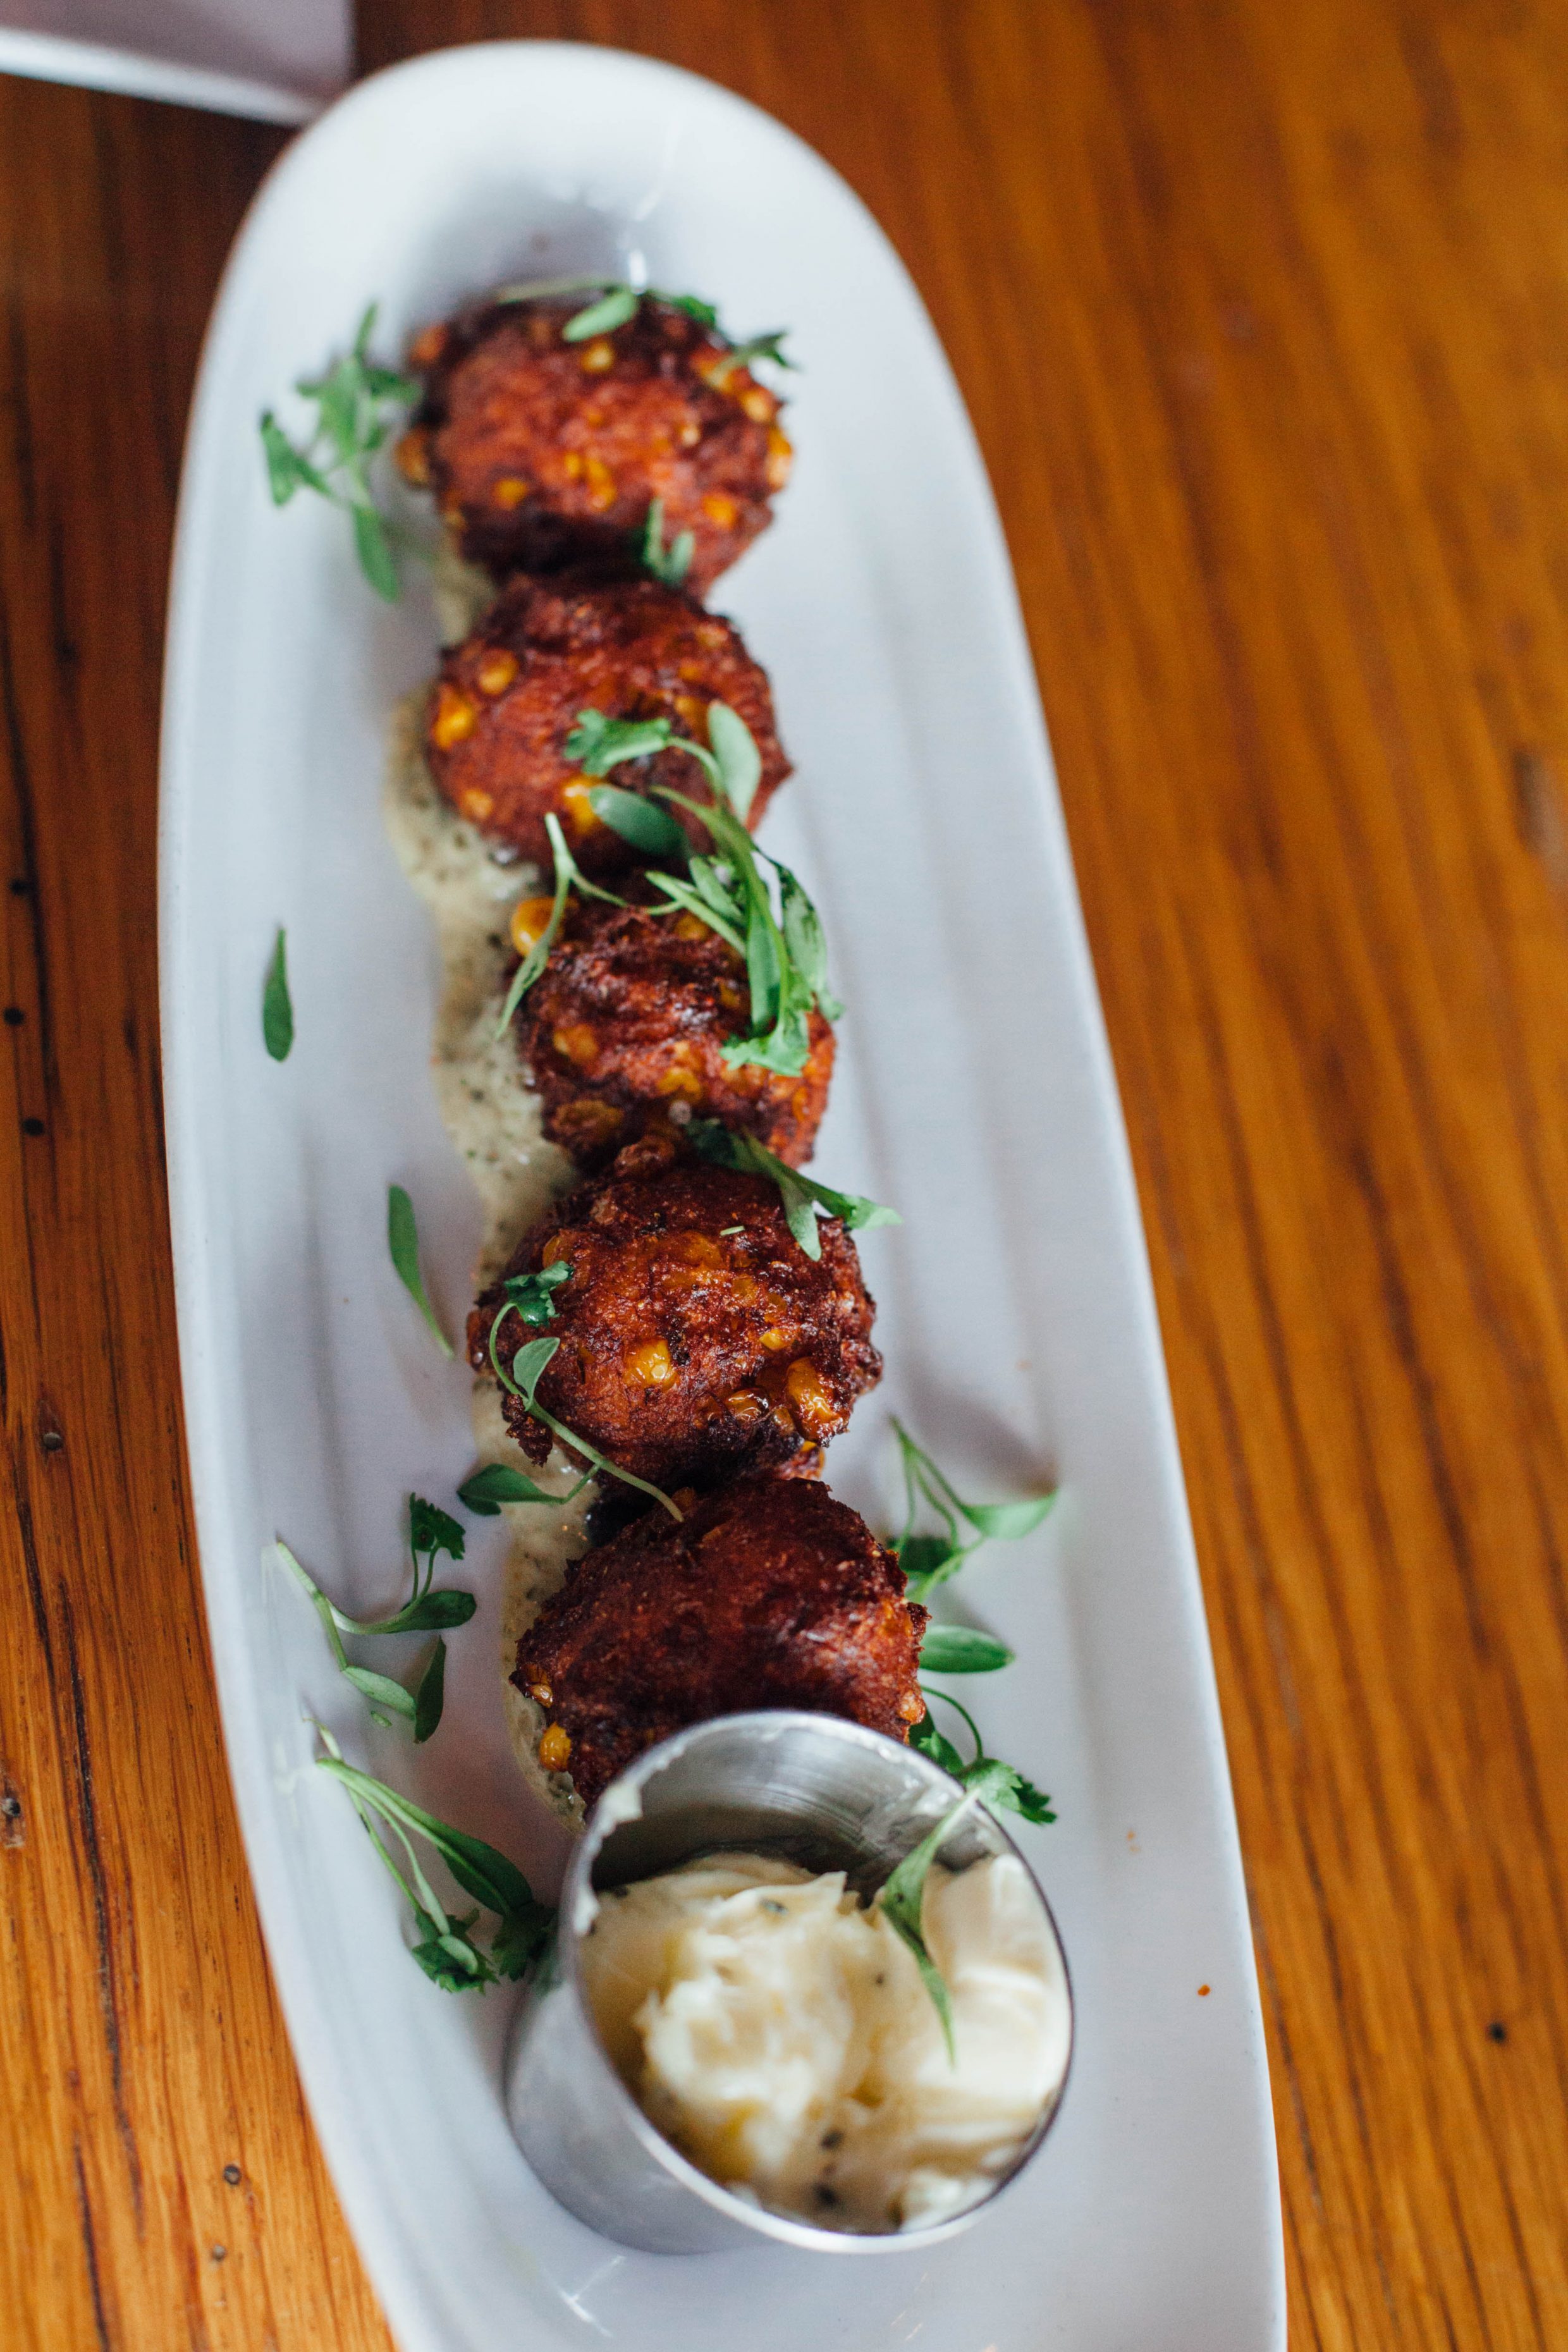 City Tap House - Corn & Crab Hushpuppies | A weekend in Washington, D.C. | Travel and Food Guide